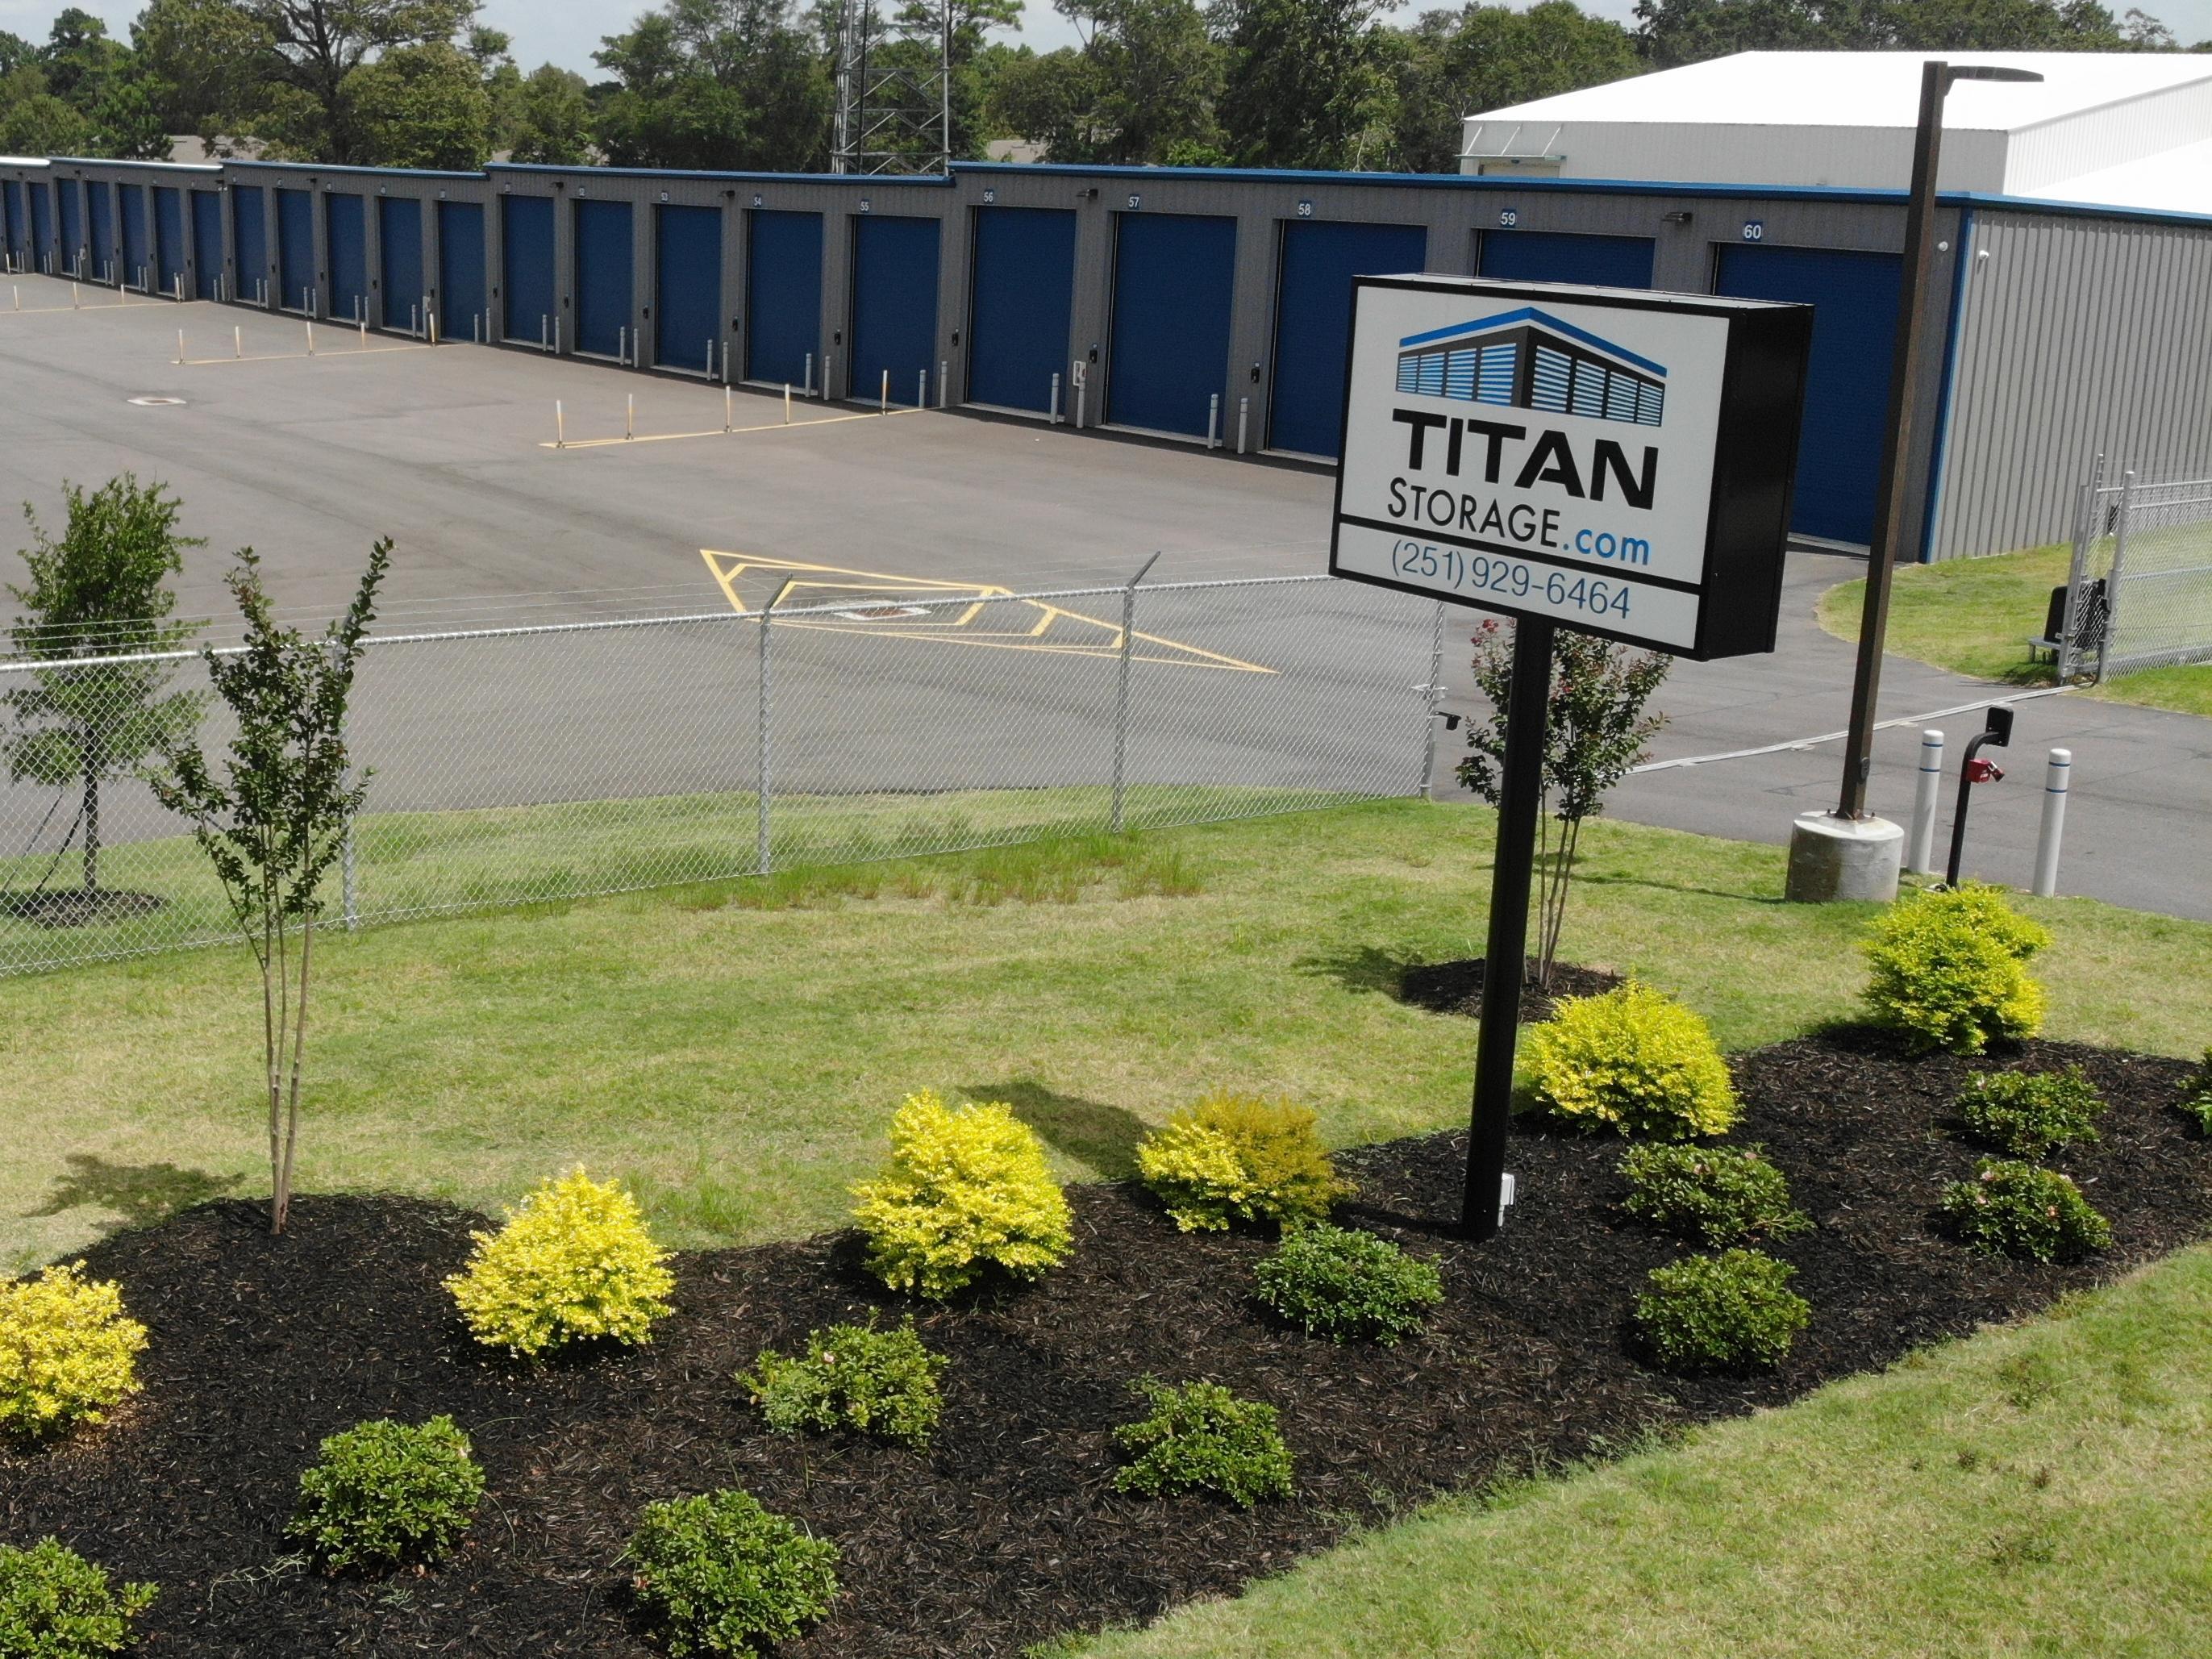 GET IN TOUCH WITH TITAN STORAGE FOR YOUR Daphne, AL OVERSIZED HOME GOODS STORAGE UNIT SOLUTION